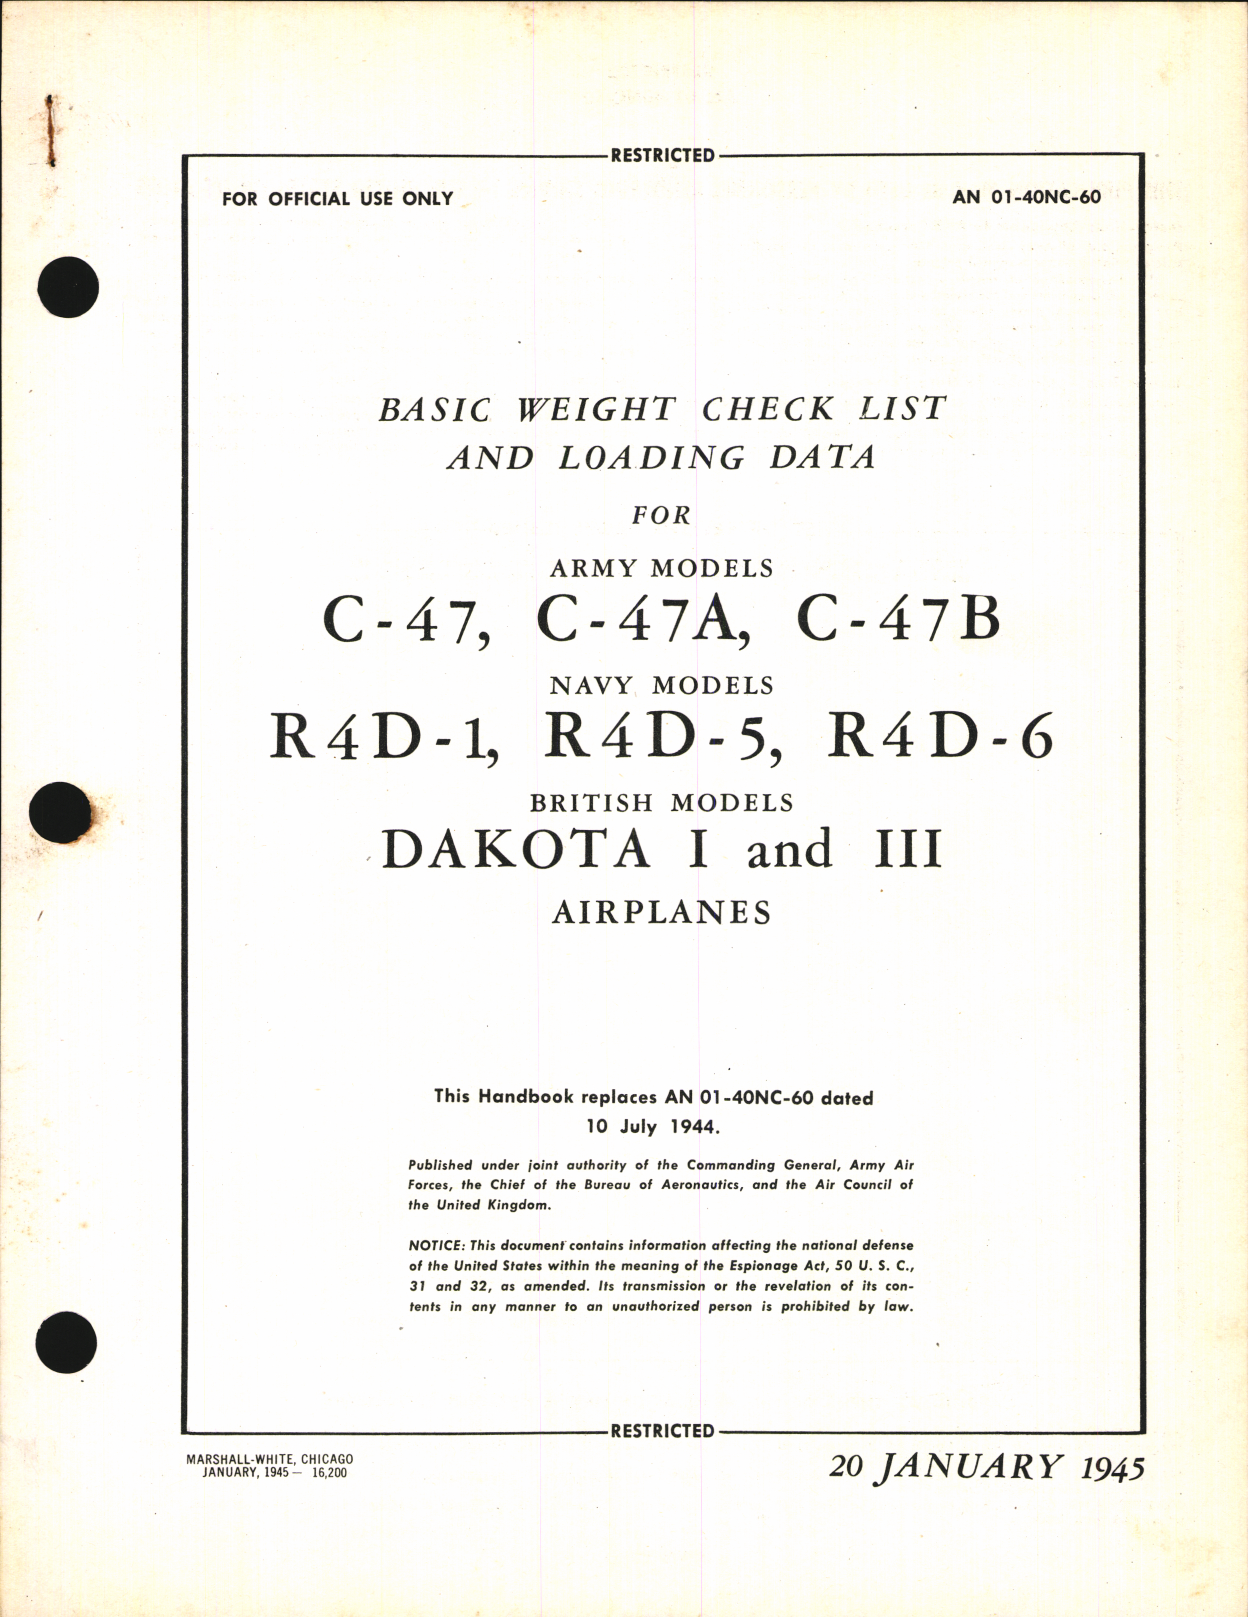 Sample page 1 from AirCorps Library document: Basic Weight Check List & Loading Data for C-47, C-47A, C-47B, R4D-1, R4D-5, and R4D-6